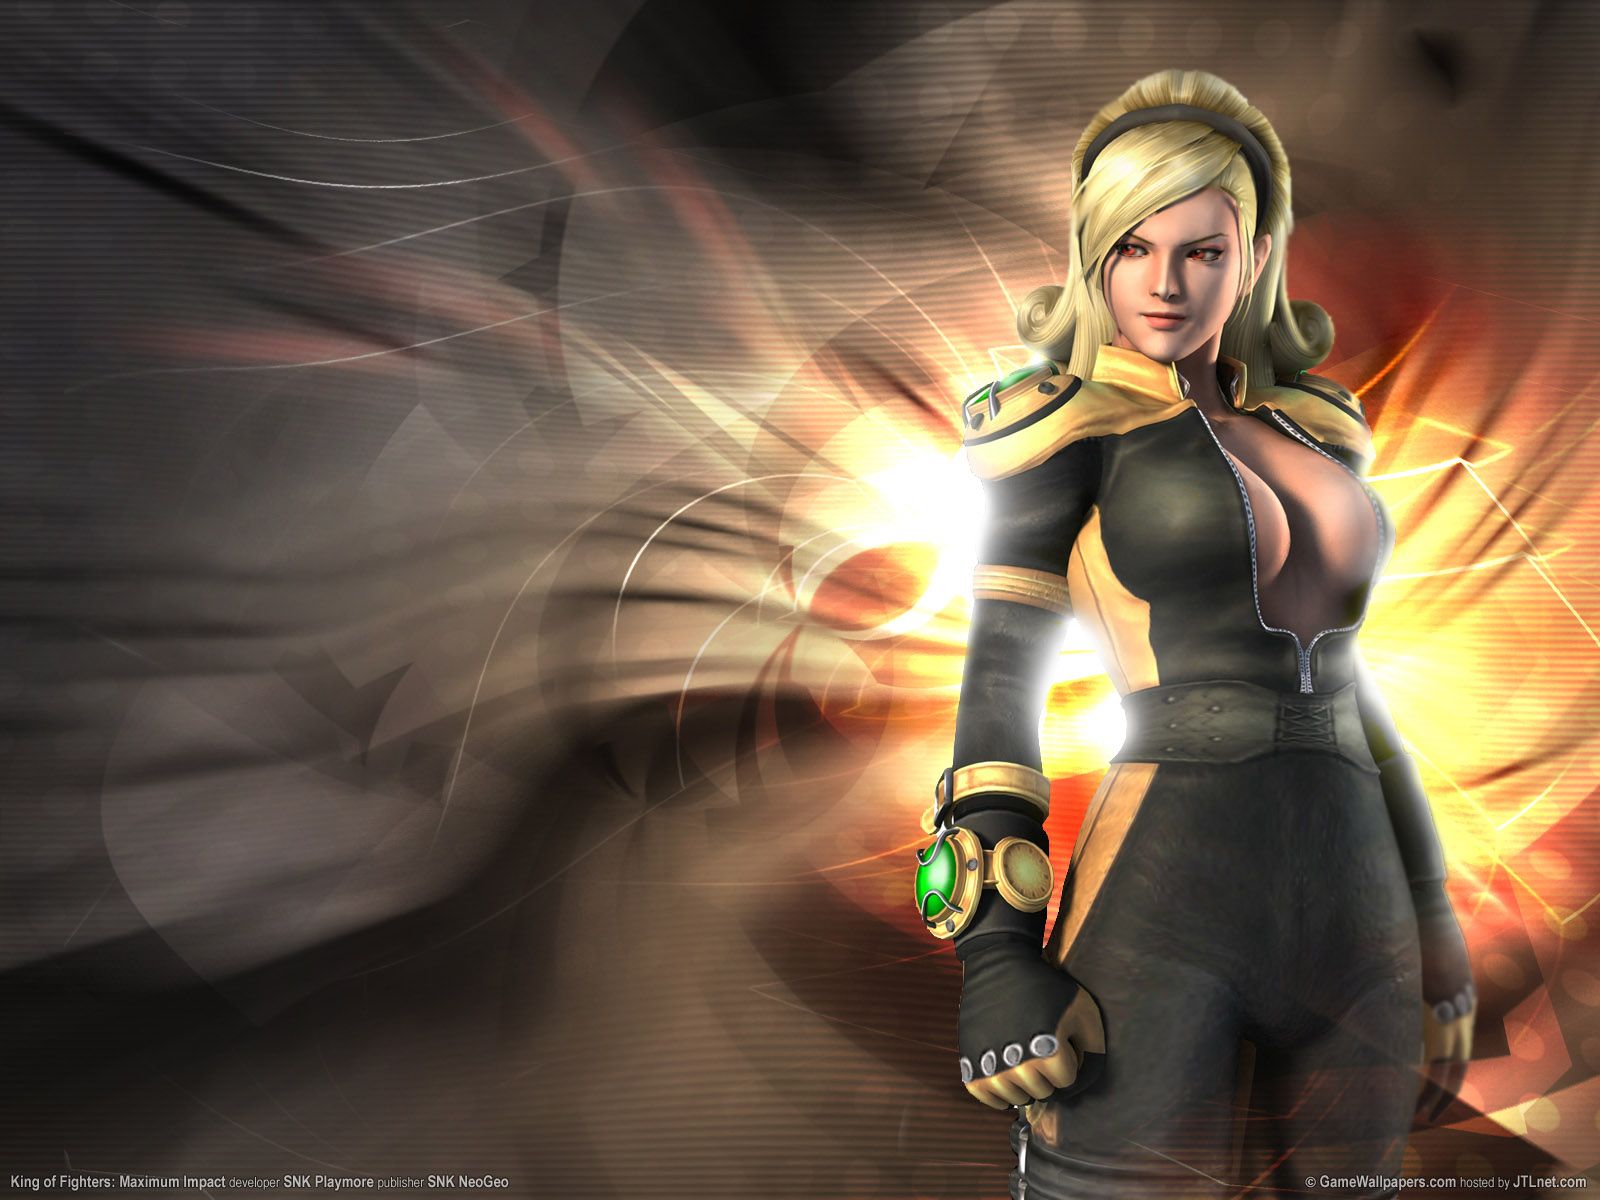 King of Fighters Wallpaper. Boozefighters MC Wallpaper, Galactic Warfighters Wallpaper and Foo Fighters Wallpaper